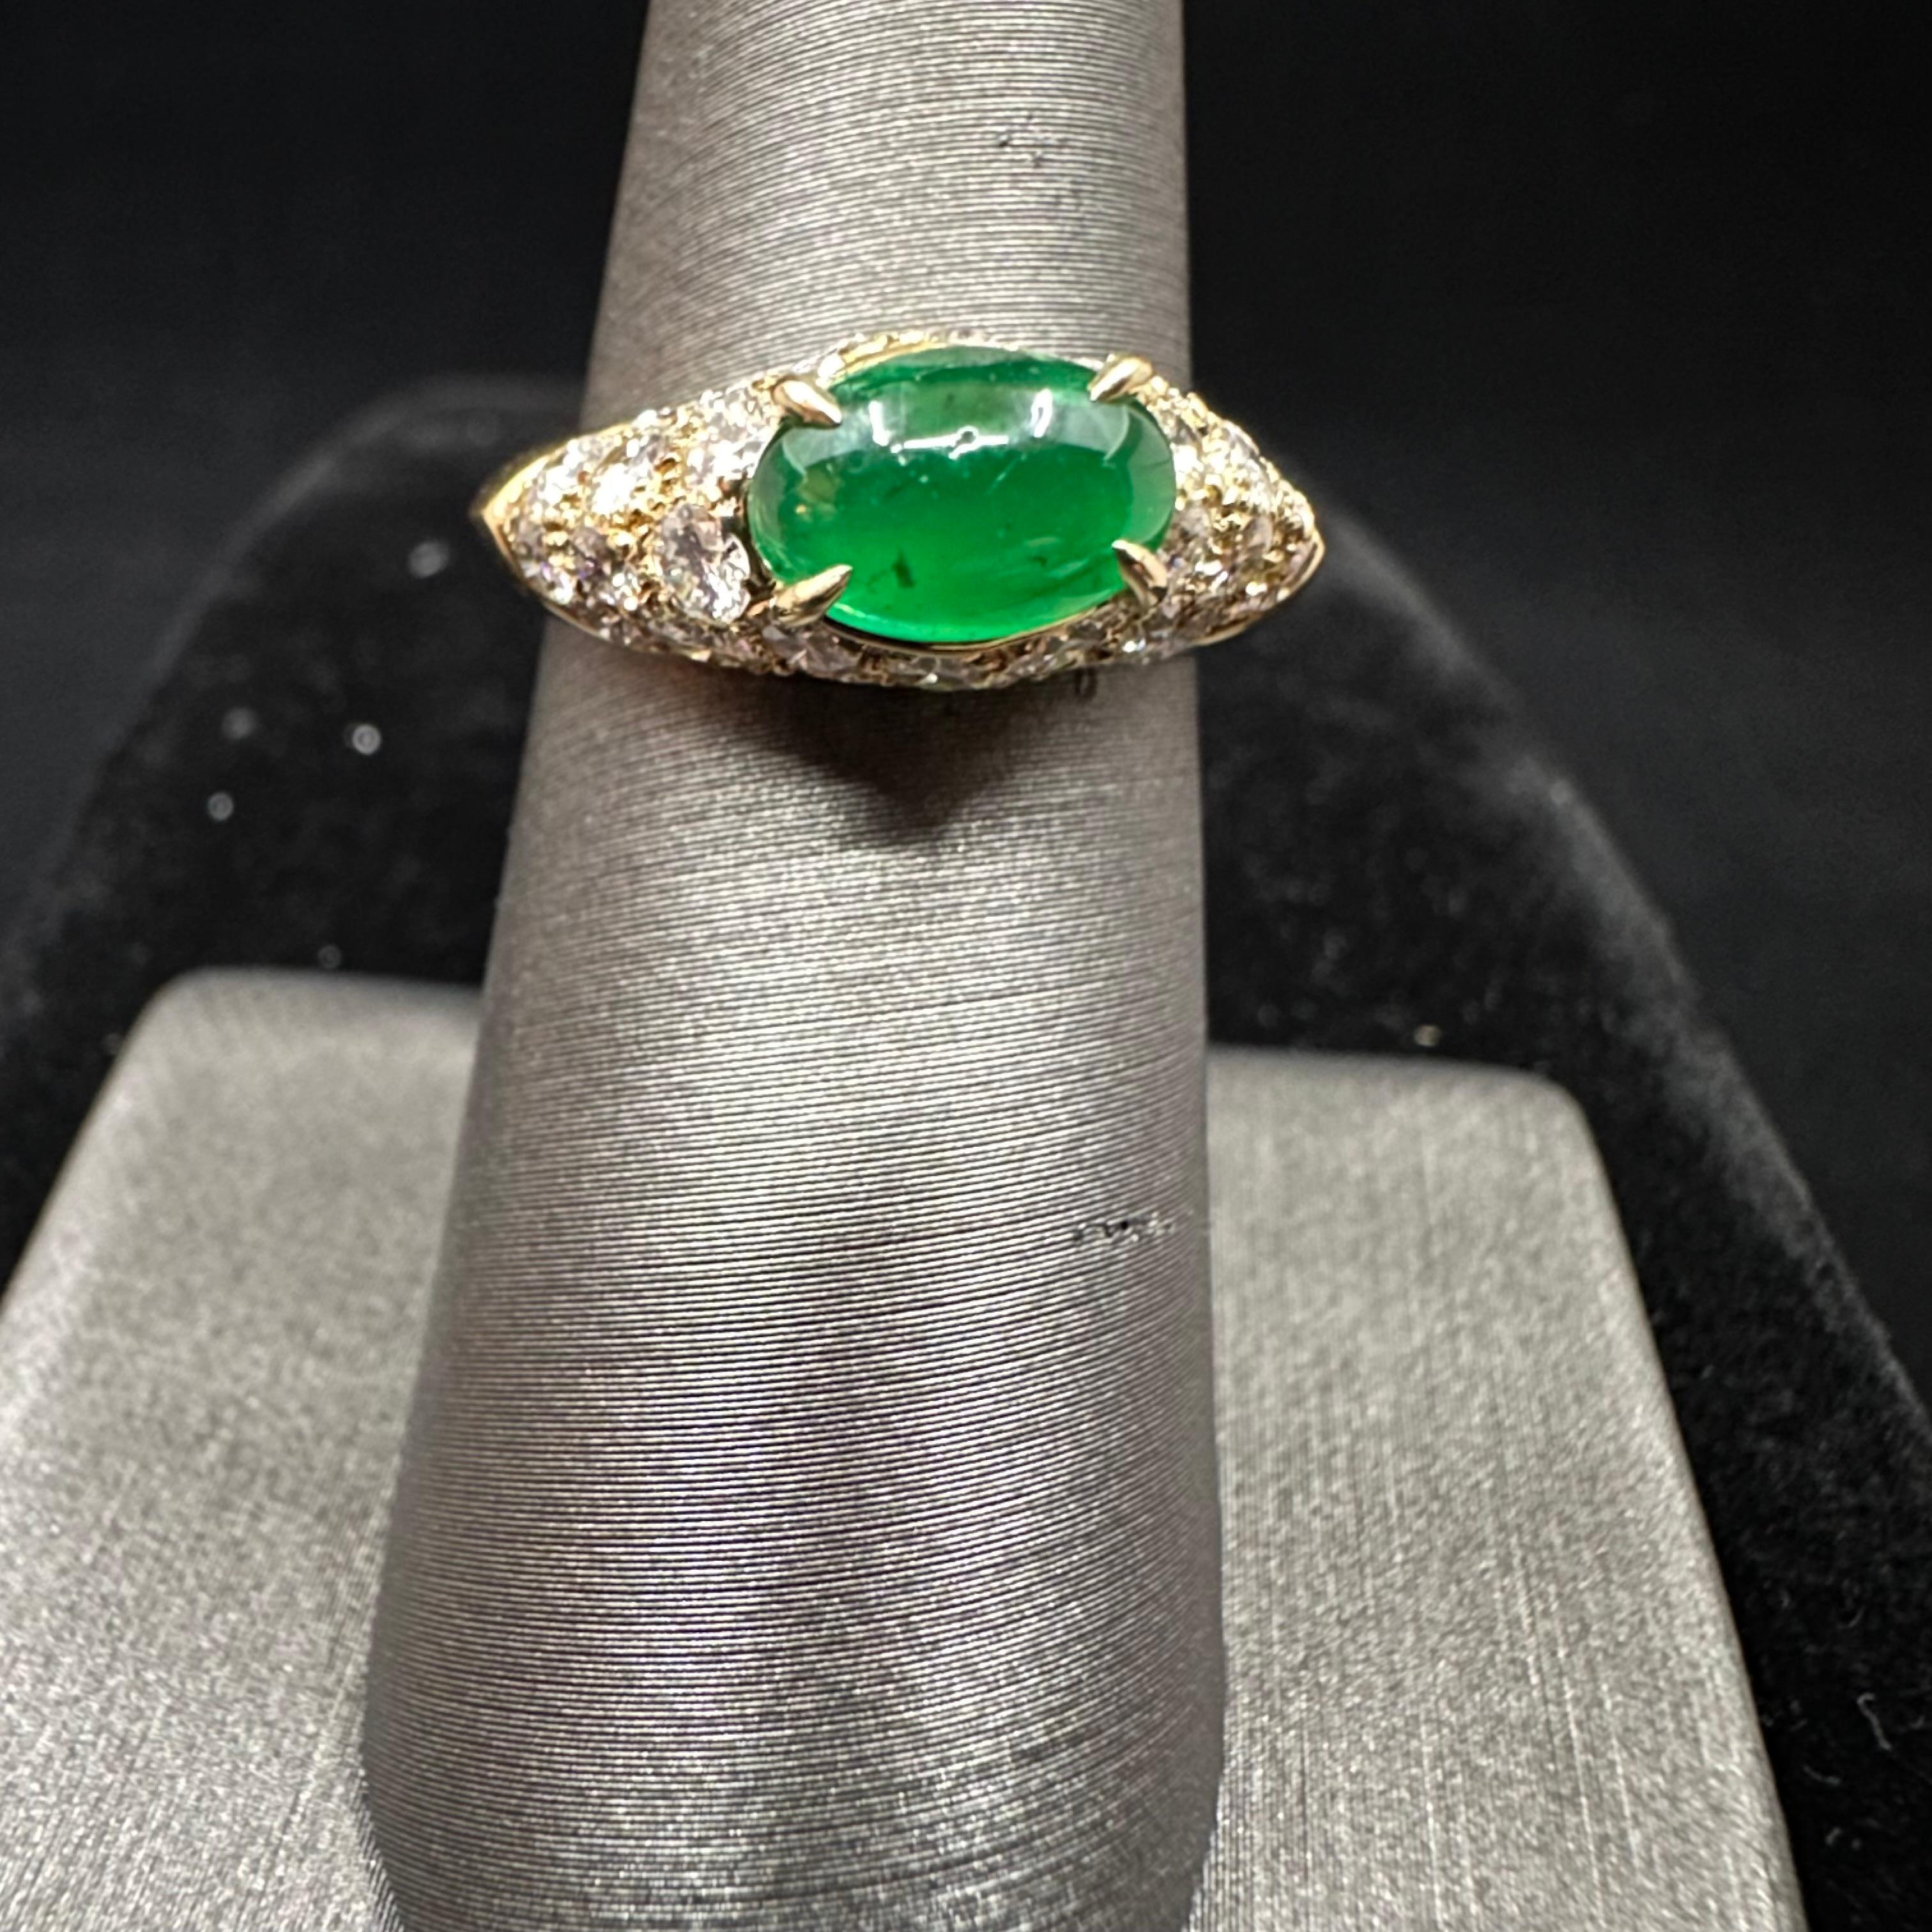 Van Cleef & Arpels
Stacking Band
Green Emerald Cabochon & Diamonds Stacking Ring, this variation also produced in ruby and sapphire from the  1970's 
Measurements:  8.2 mm x 5.5 mm x 2.8 mm
Green Emerald:  1.35 ct 
32 Round Brilliant cut